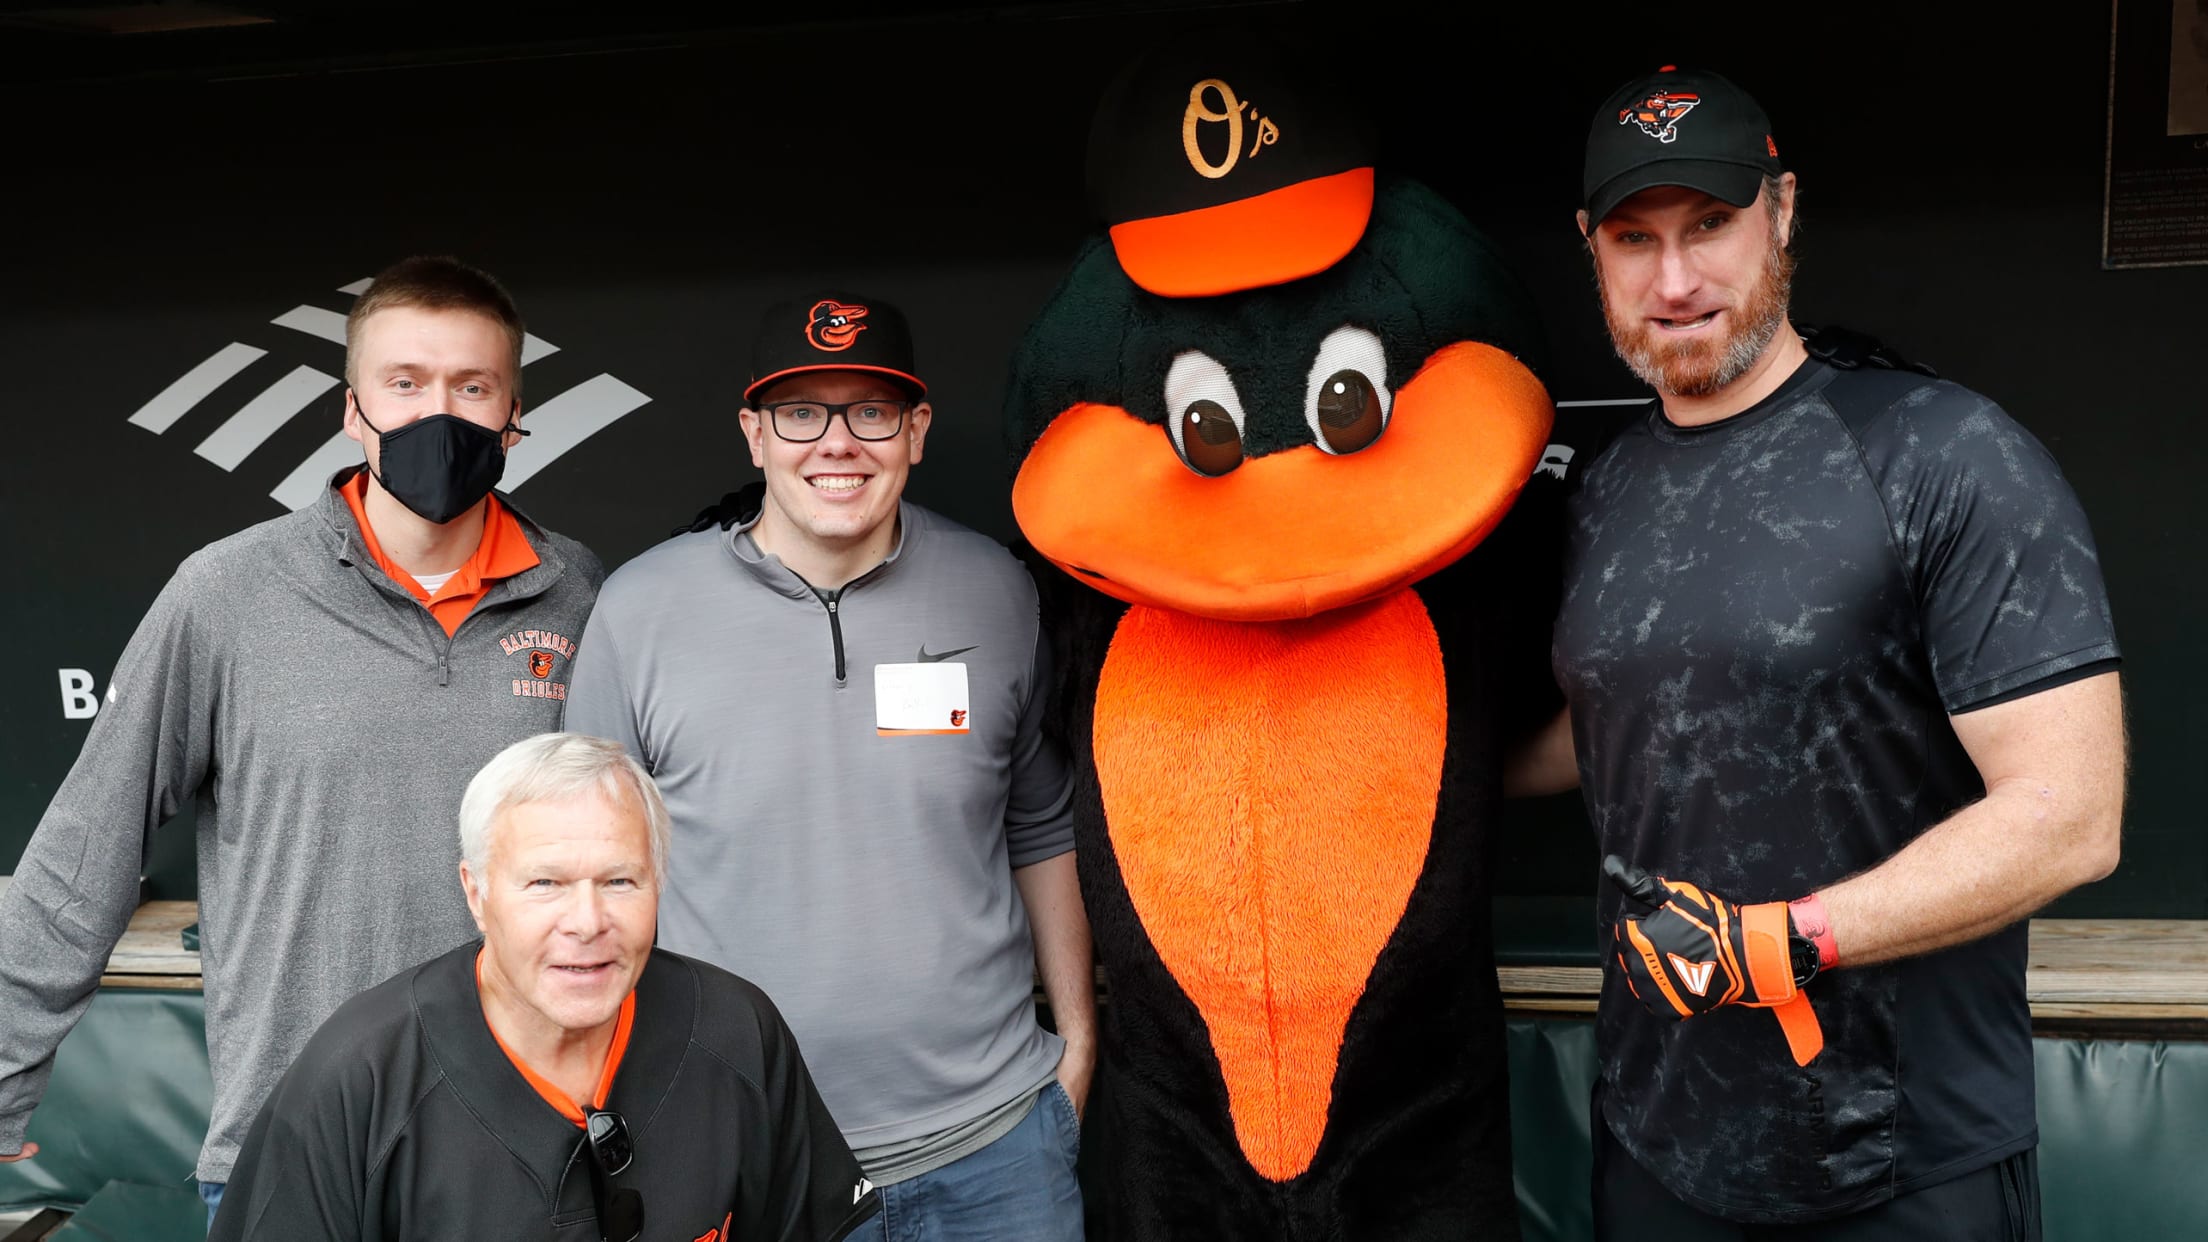 Floppy hat, Hawaiian shirts giveaways set for Orioles-Angels games, Life